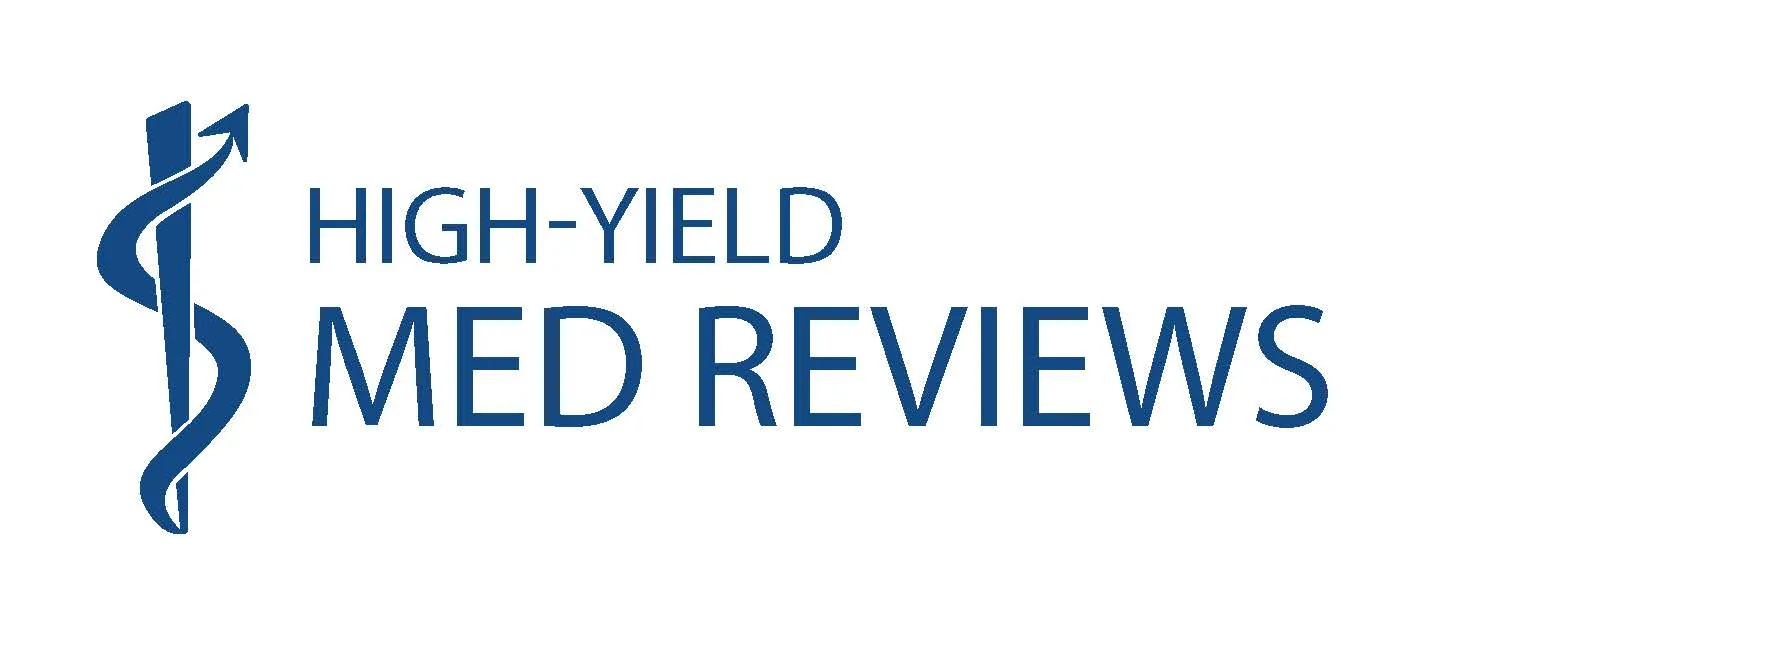 High-Yield Med Reviews